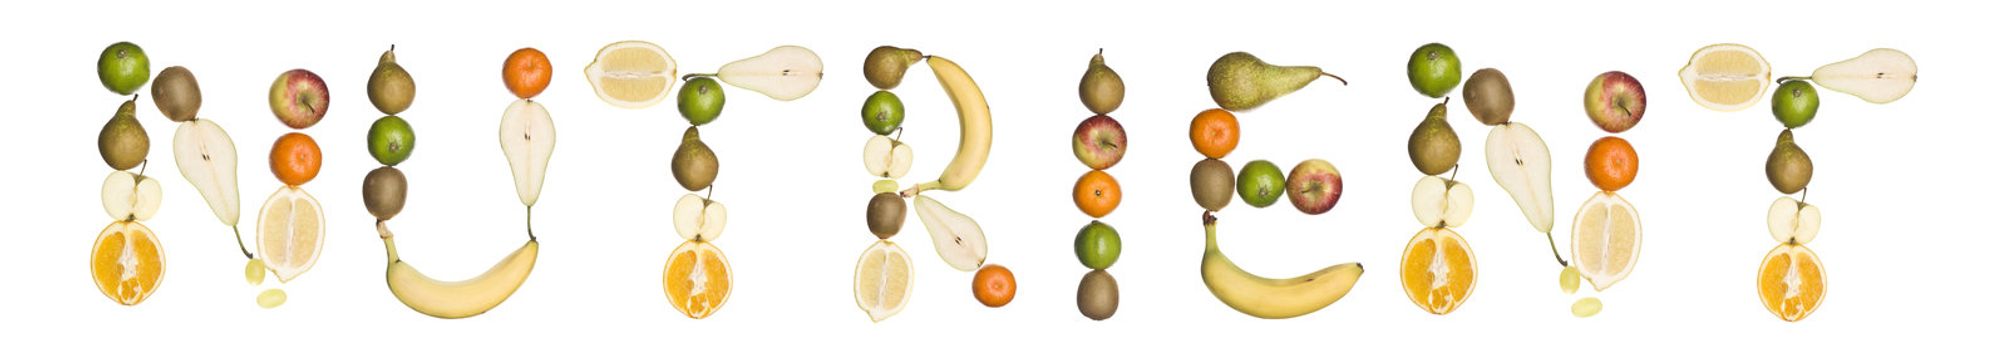 The word 'Nutrient' made out of fruit isolated on a white background